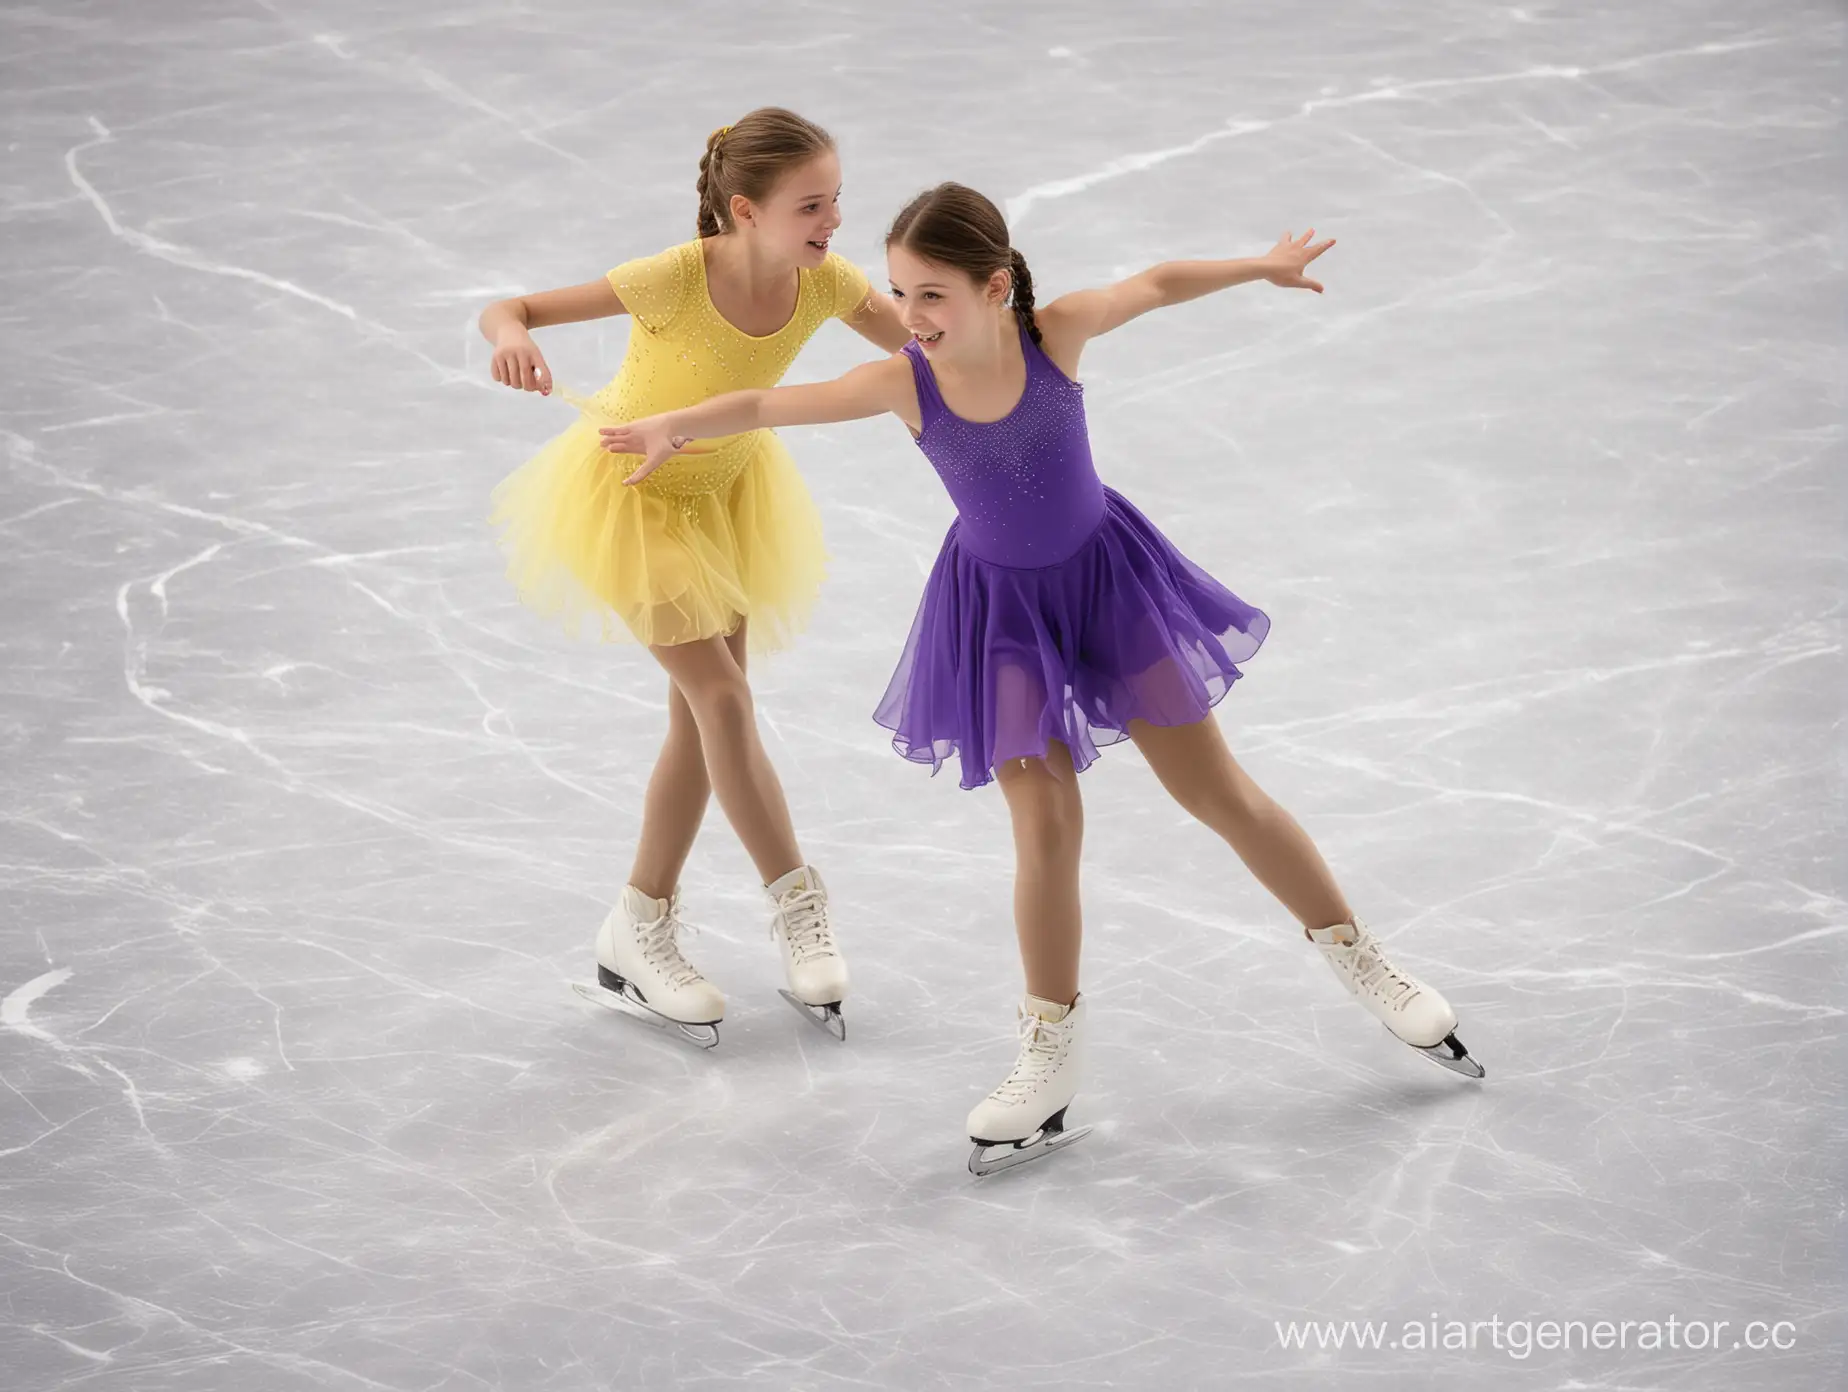 Children-Figure-Skating-on-Vibrant-Purple-and-Yellow-Ice